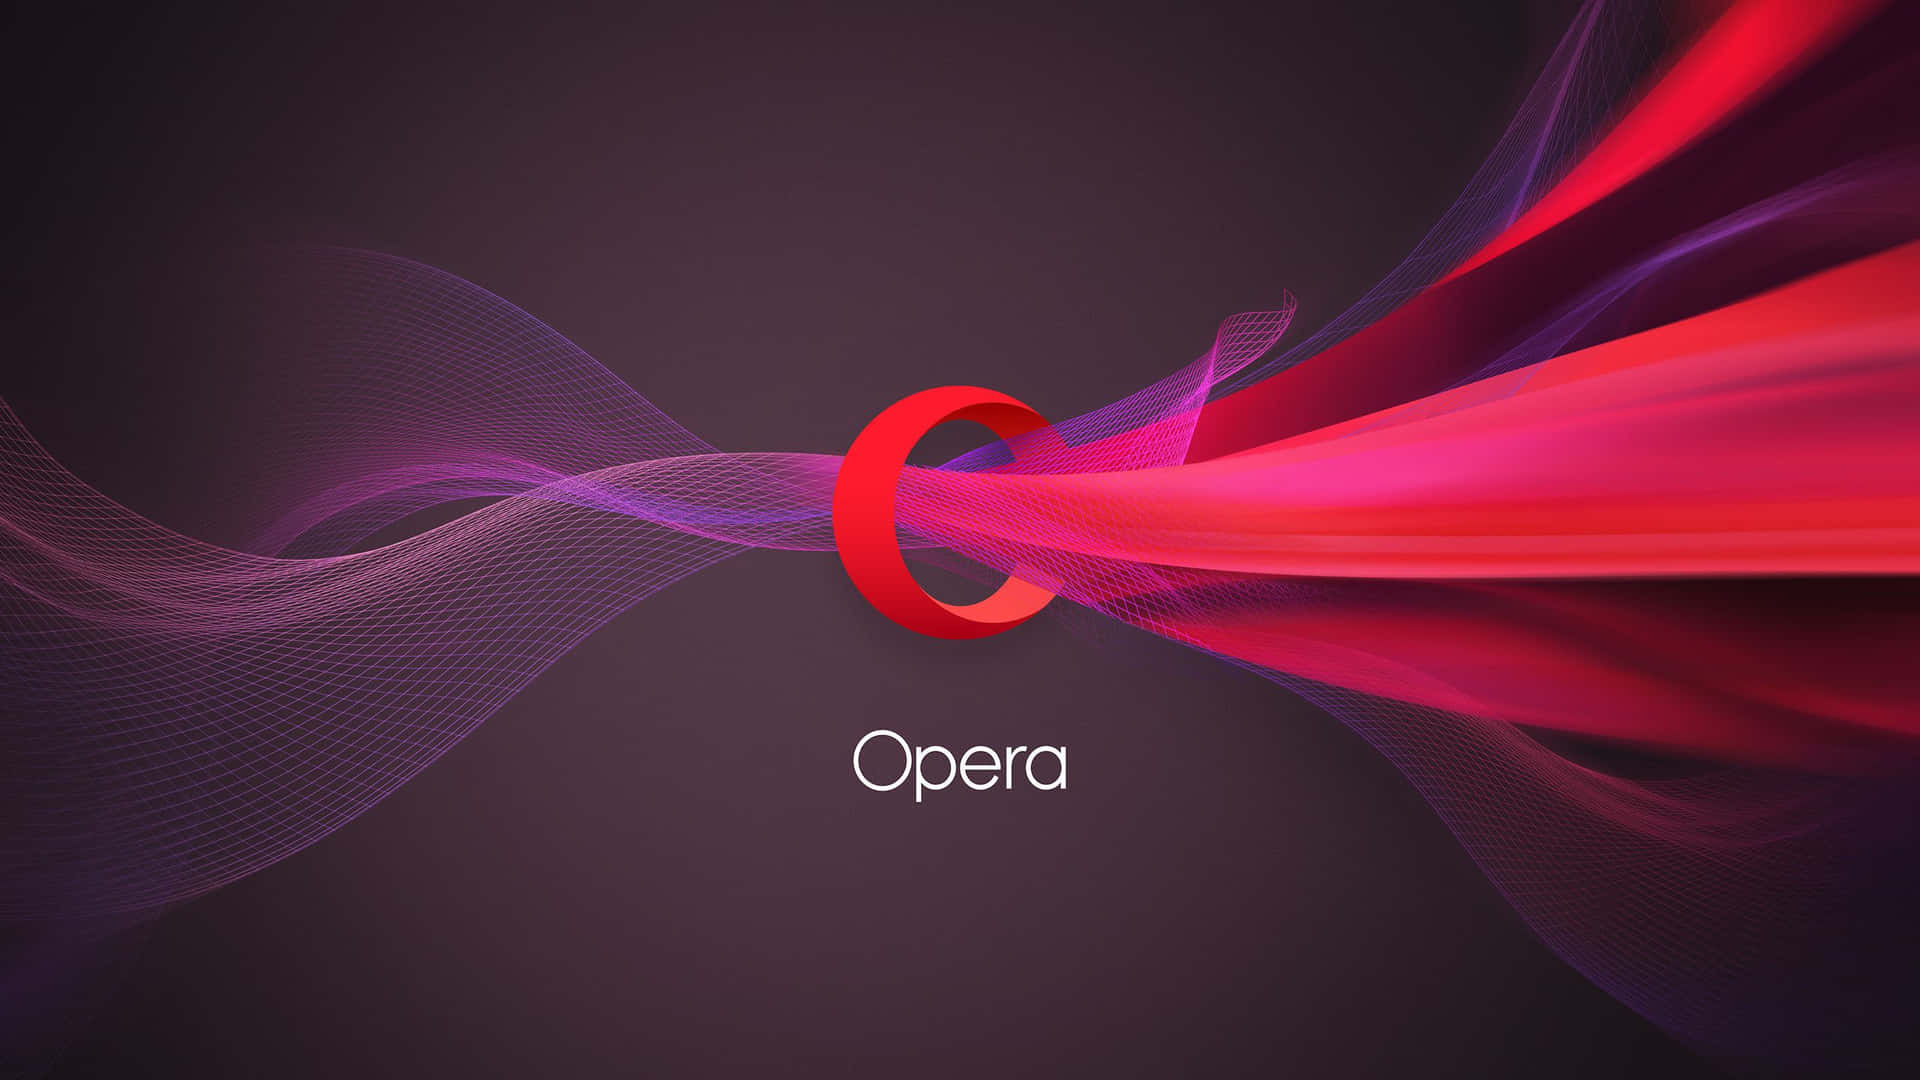 Opera Browser - A Red And Purple Background Wallpaper